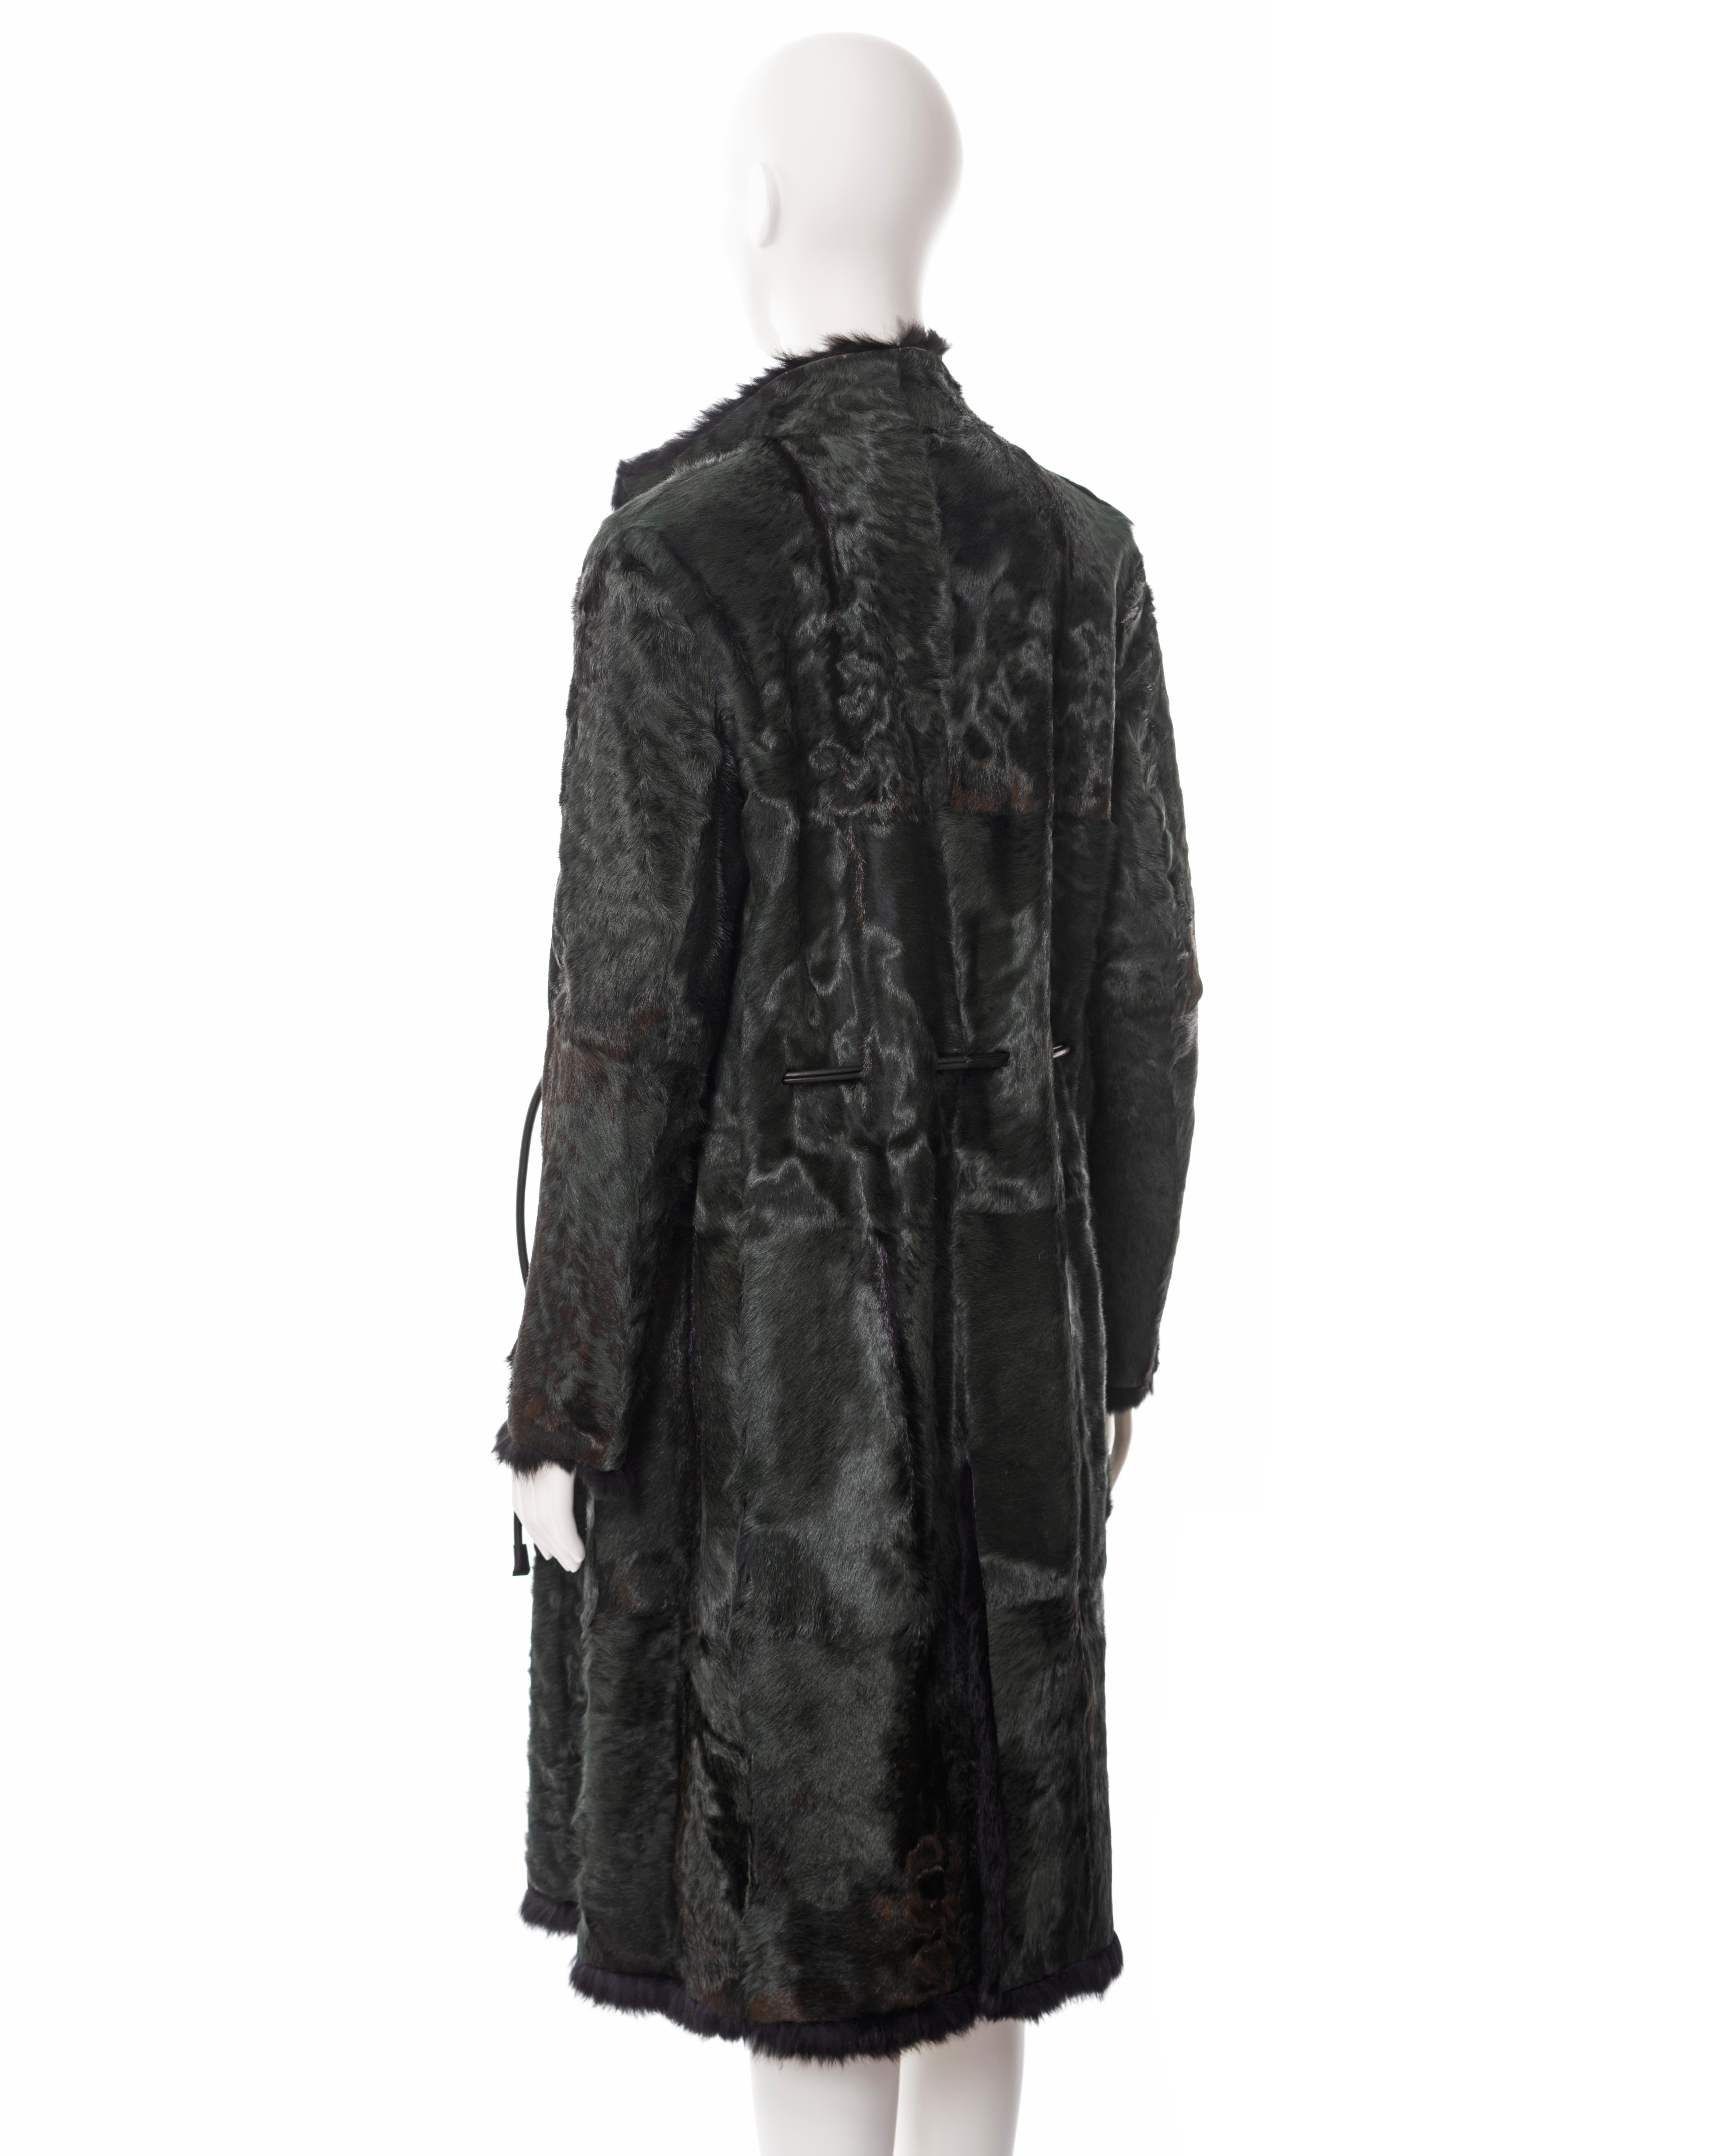 Gucci by Tom Ford reversible green and black fur coat, fw 1999 For Sale 8